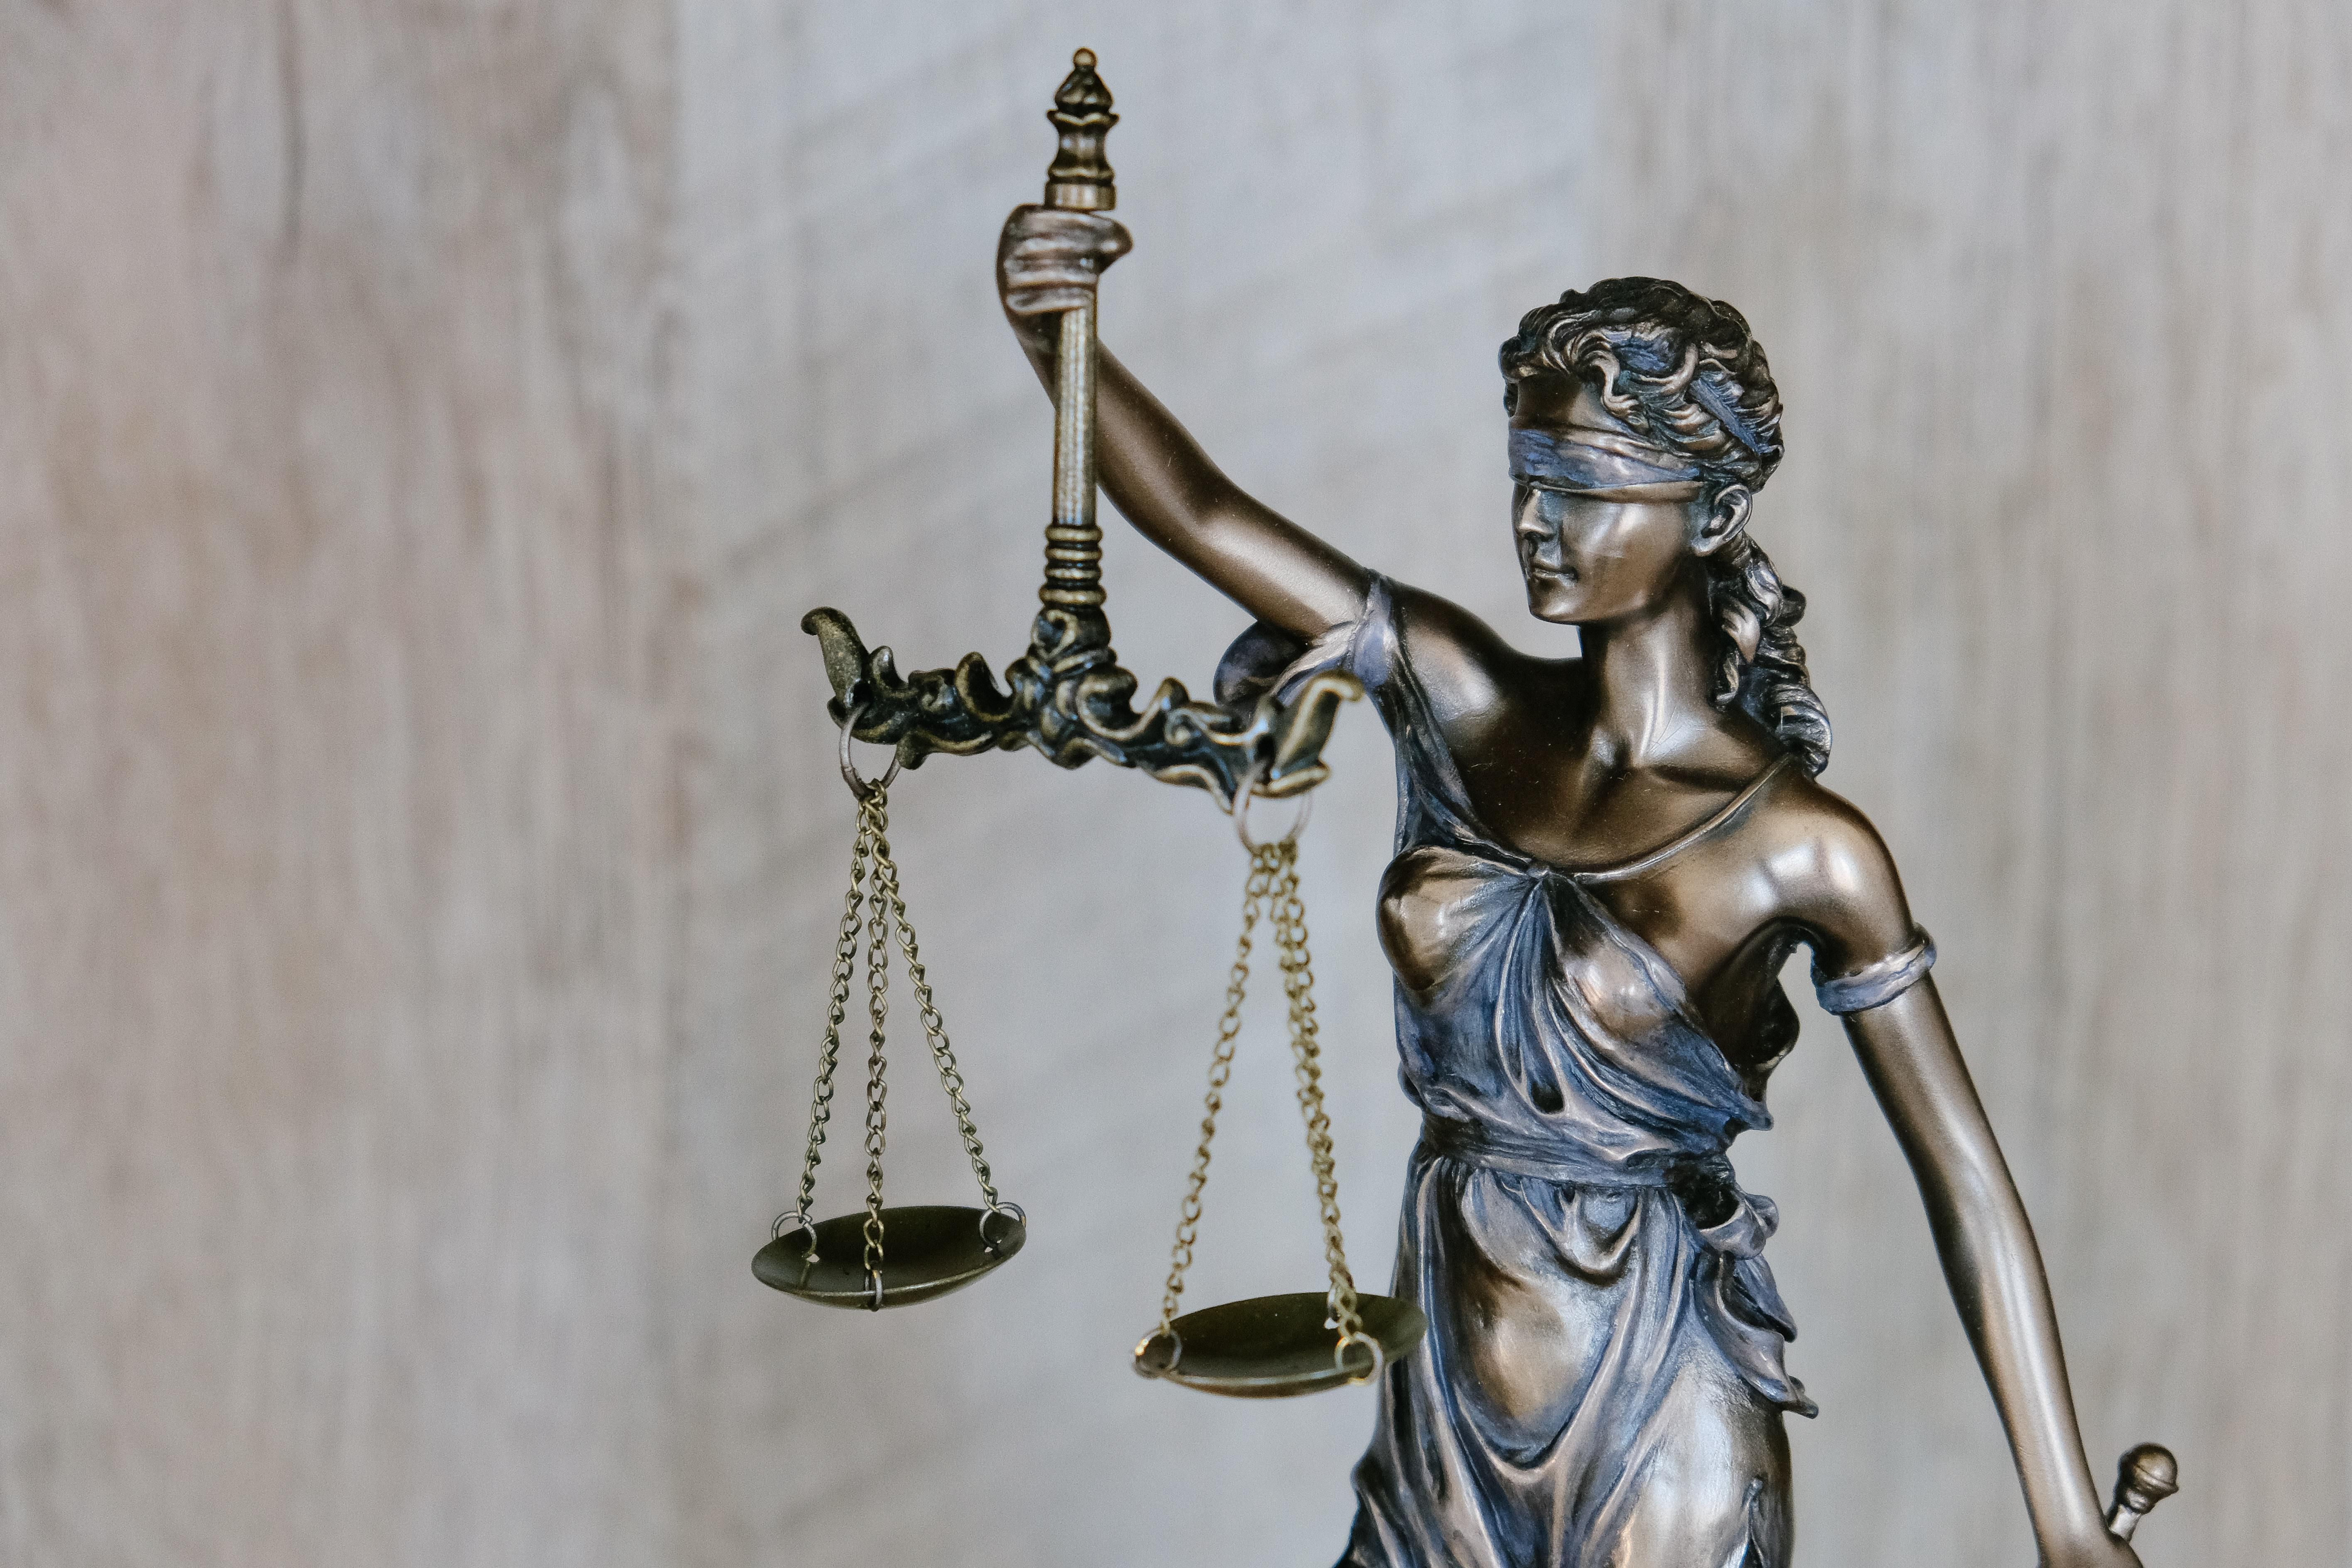 image of the scales of justice.